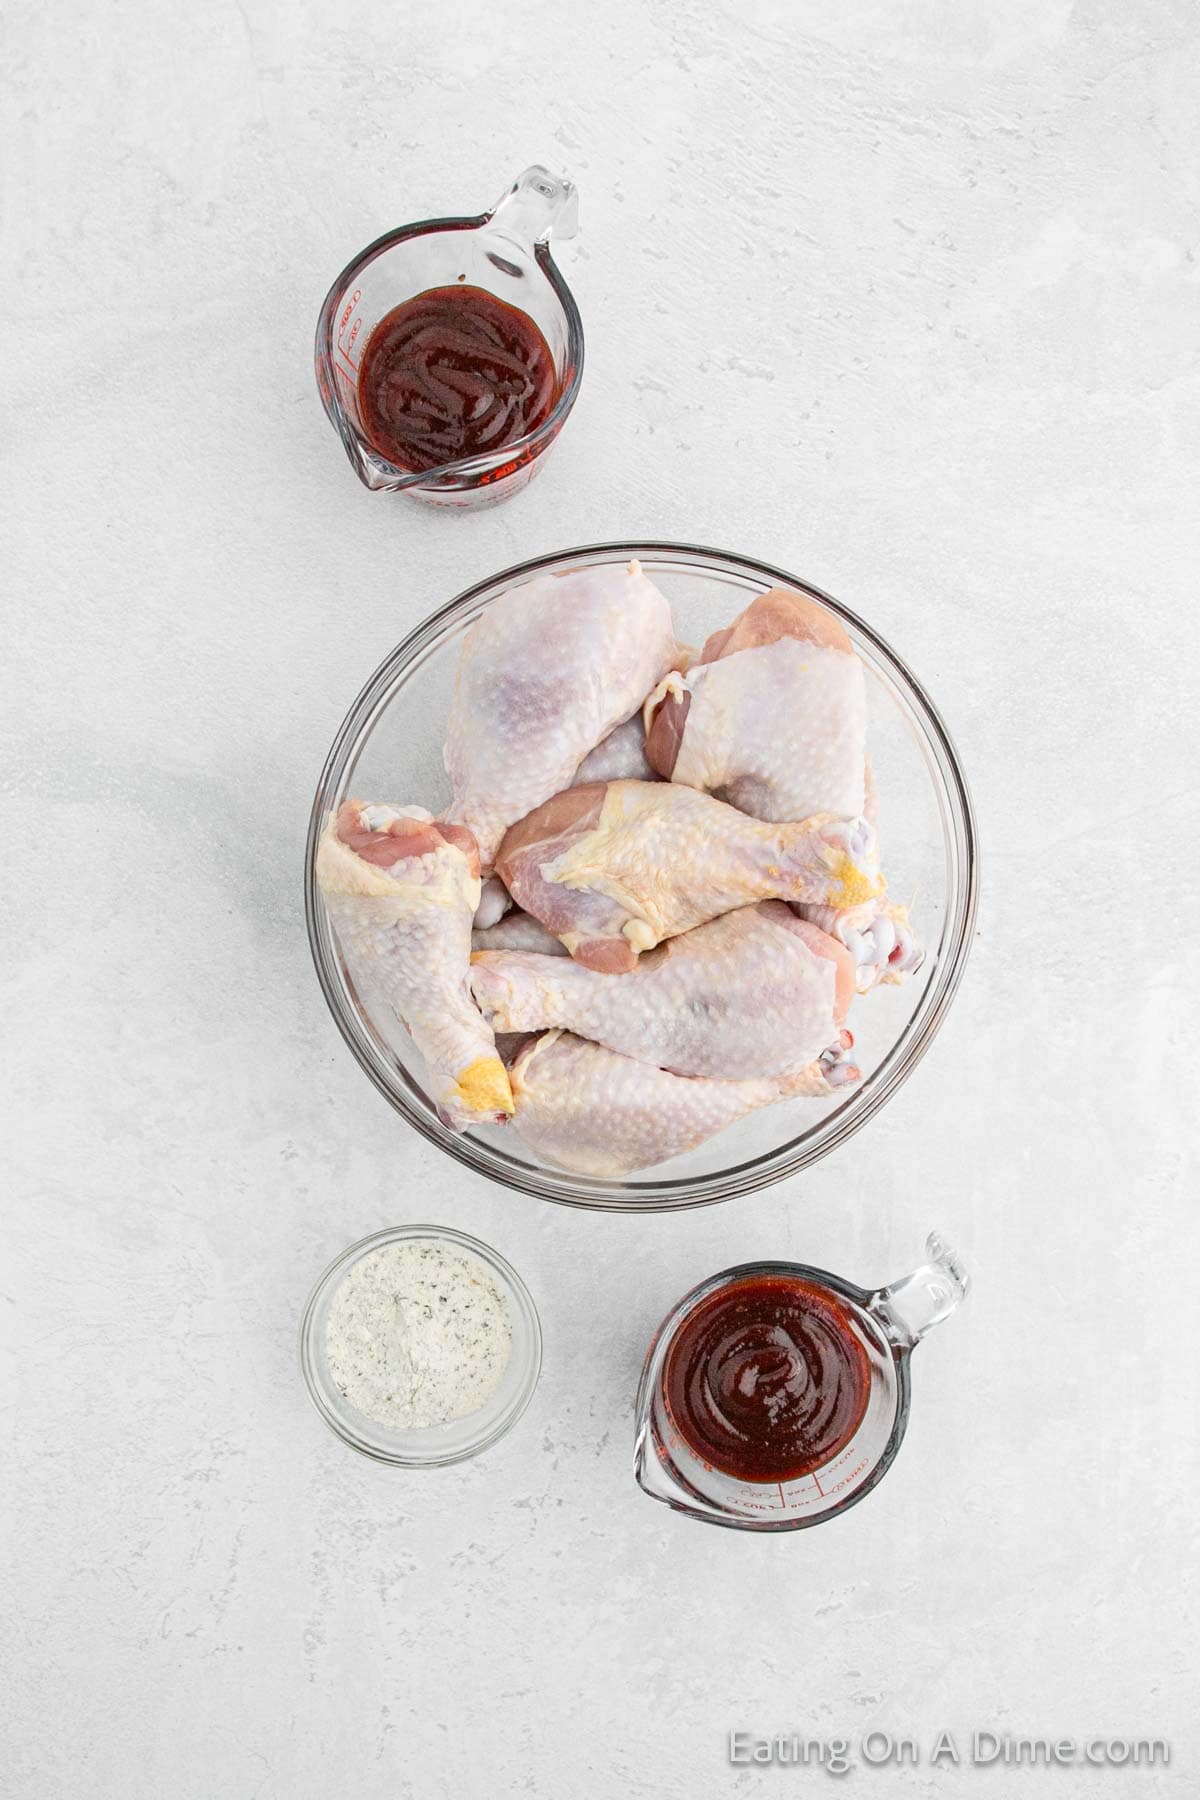 A glass bowl filled with raw chicken pieces is at the center. Surrounding the bowl are three glass containers: one with BBQ sauce on top, another with a dry white seasoning mix at the bottom, and a third with more BBQ sauce on the right, setting the stage for a delicious Crock Pot BBQ Ranch Drumsticks recipe.